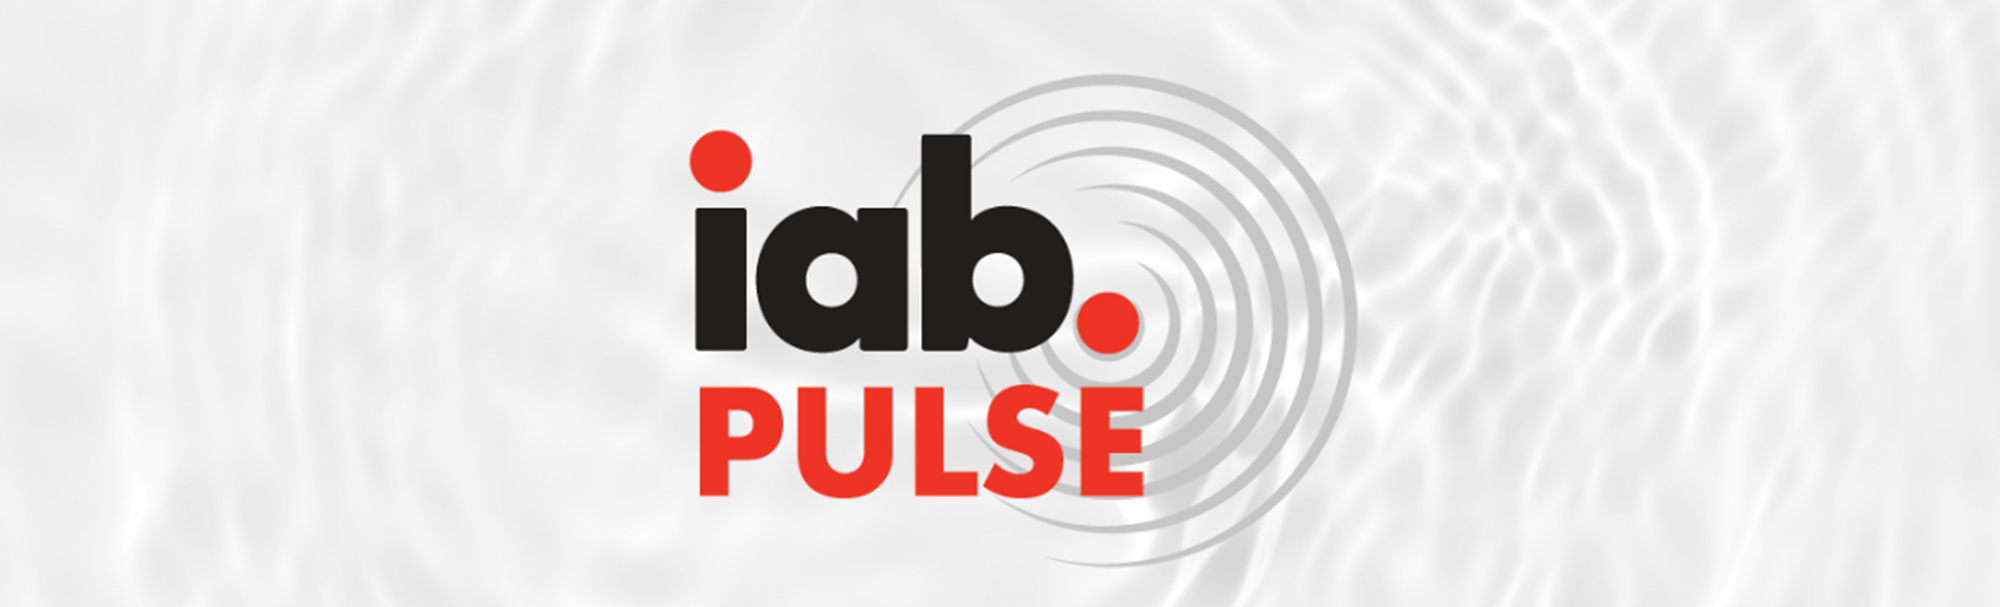 featured image for IAB Pulse